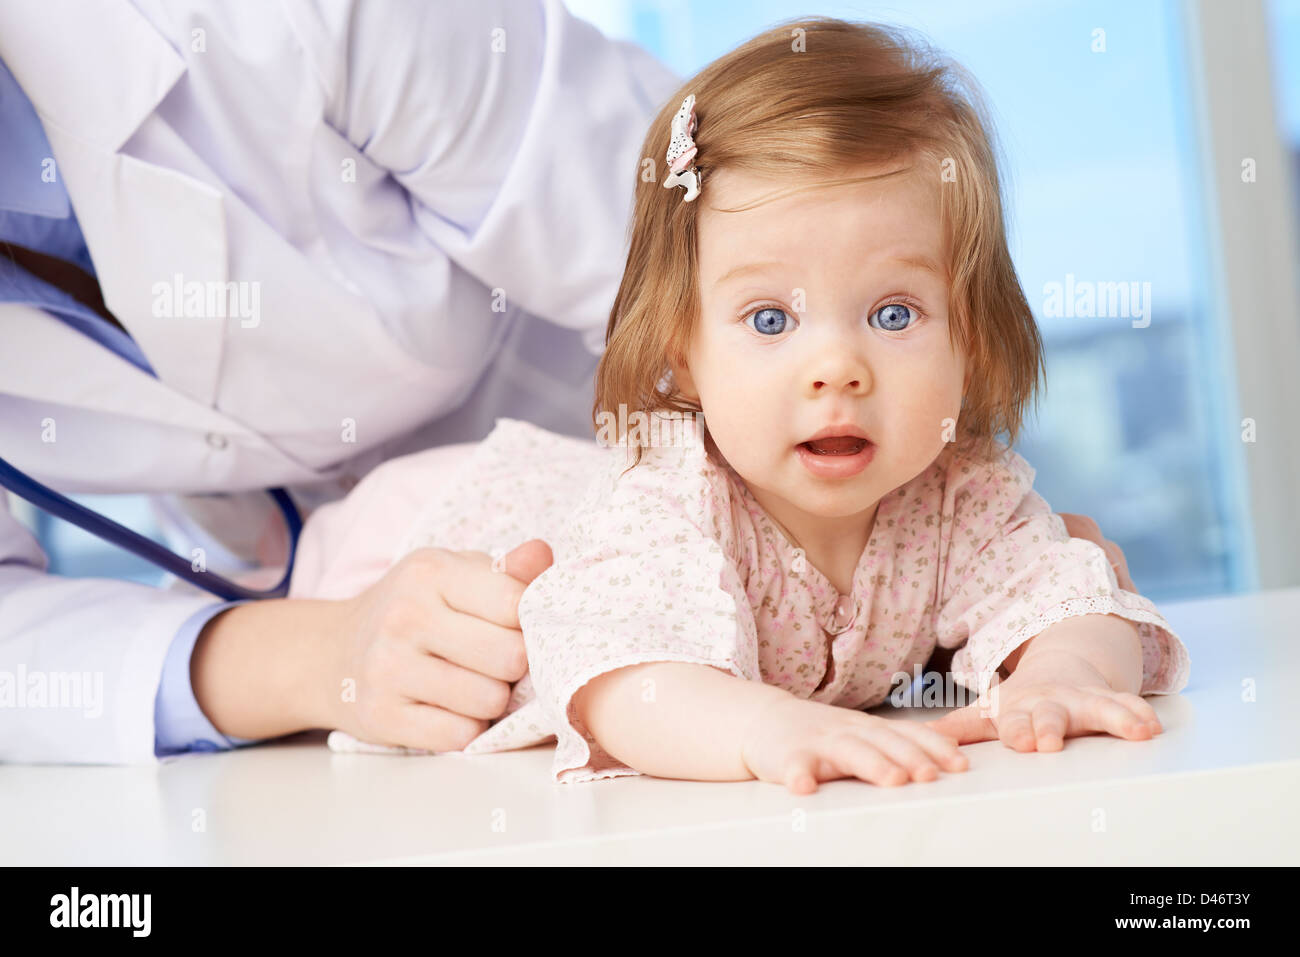 Cute baby being examined in hospital Stock Photo